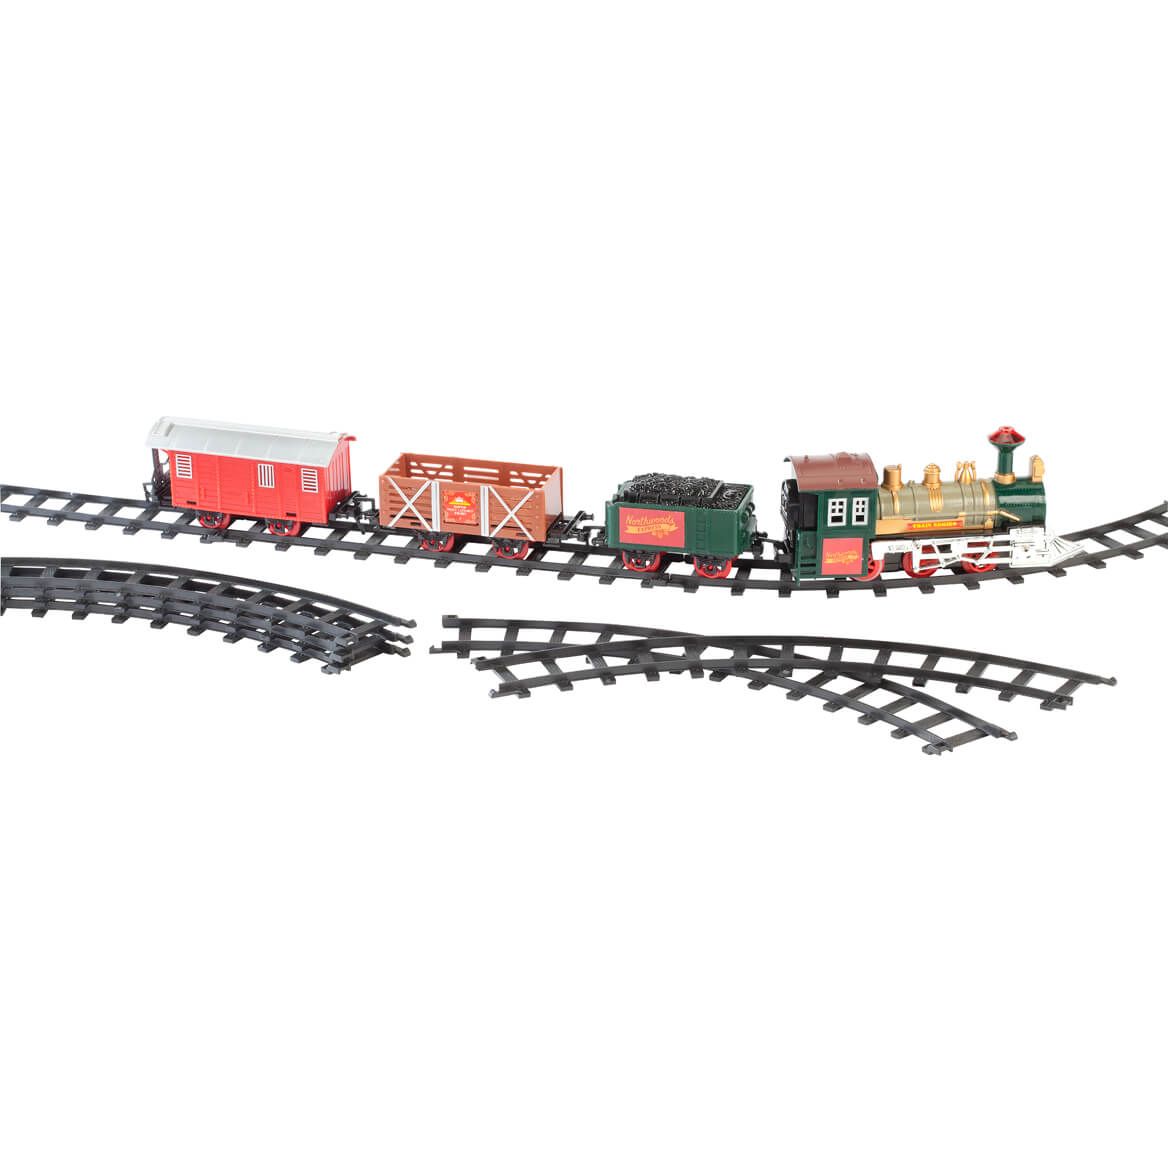 Northwoods Express Train Set - Electric Train Sets - Miles Kimball